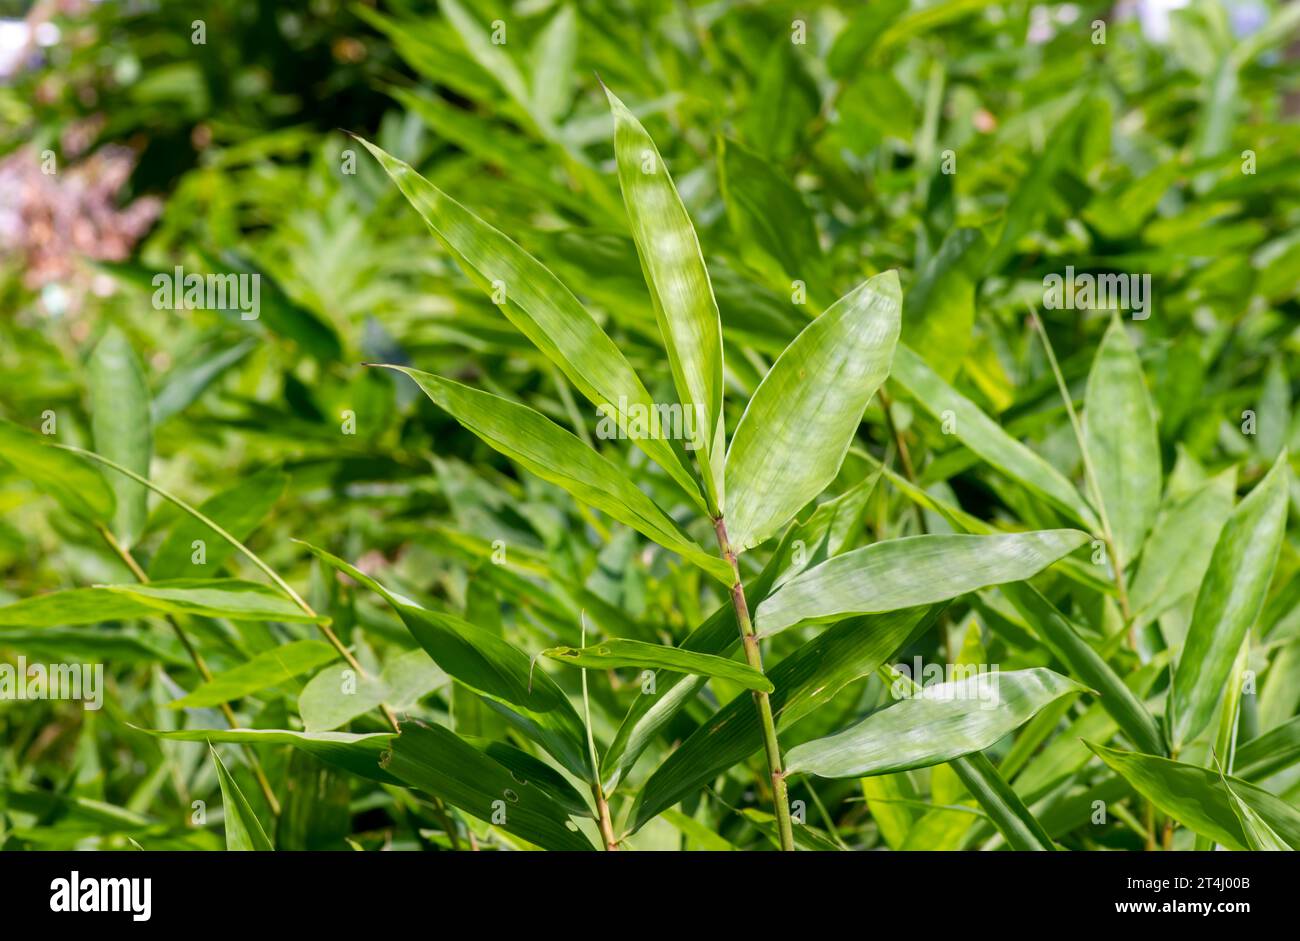 Young bamboo plant, Bambusa sp., in the nursery for natural background. Shallow focus. Stock Photo